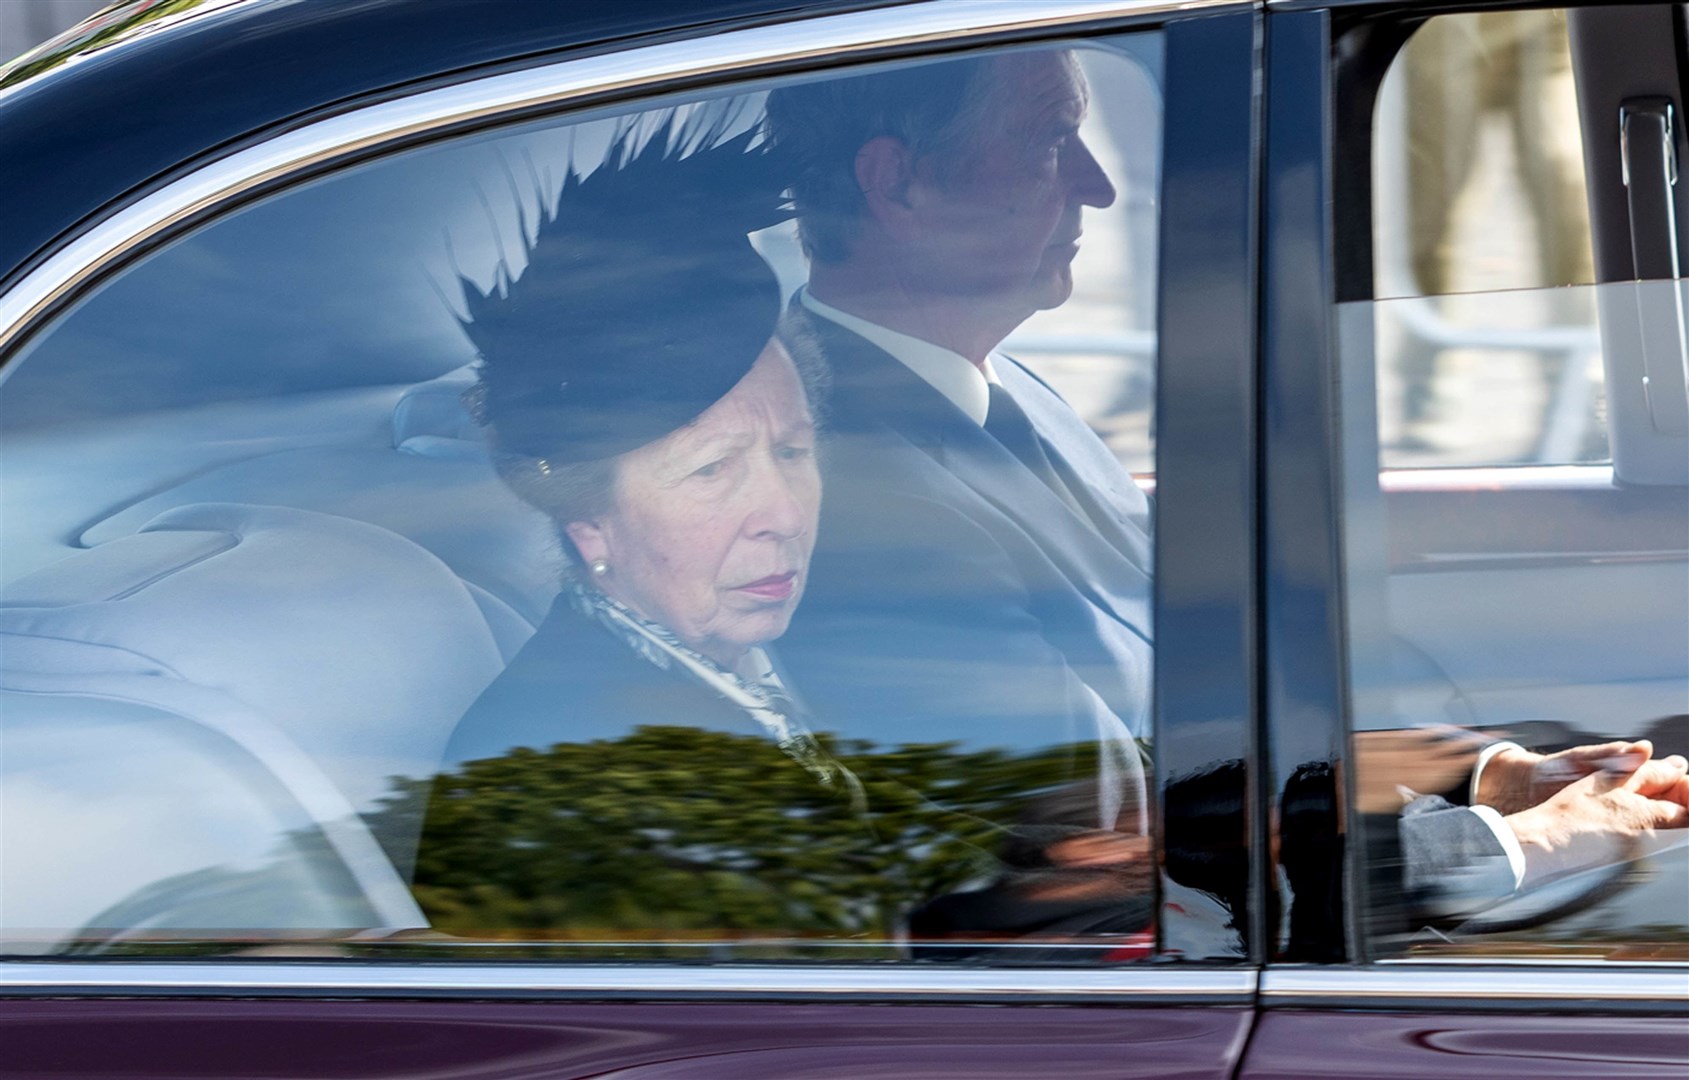 The Princess Royal and her husband Admiral Sir Tim Laurence travelled behind the hearse (Paul Campbell/PA)